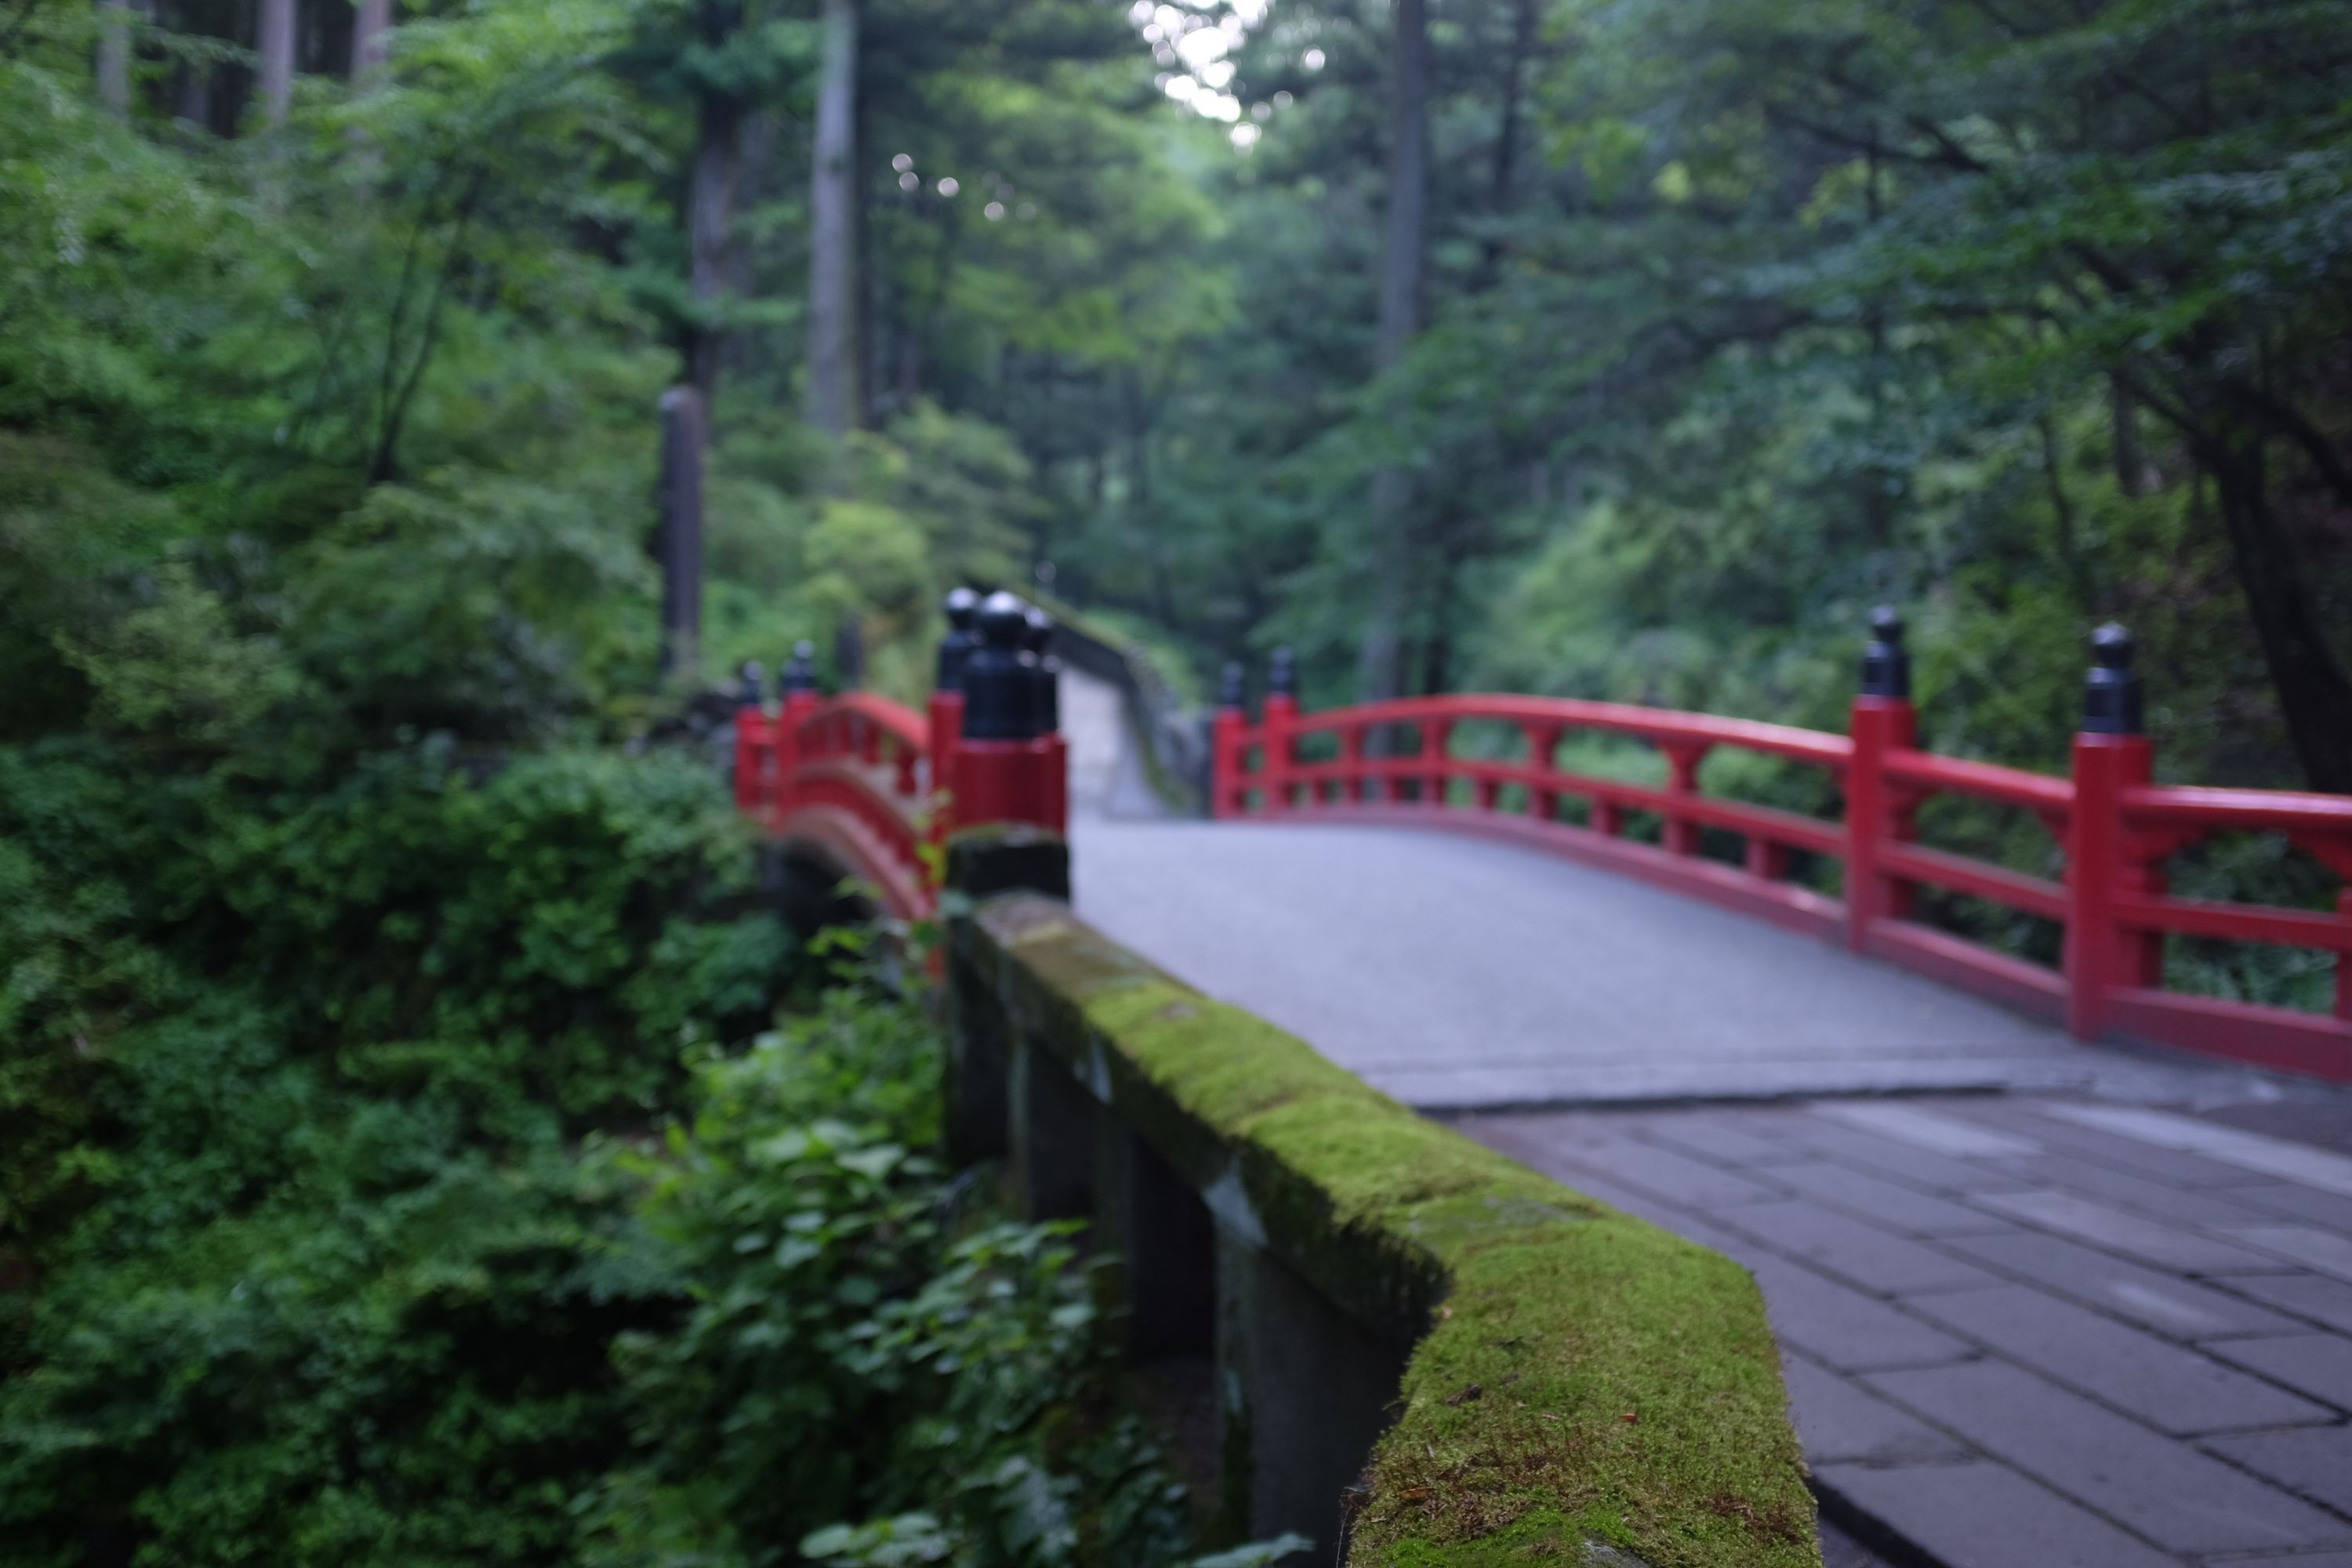 A red bridge leads into a forest.